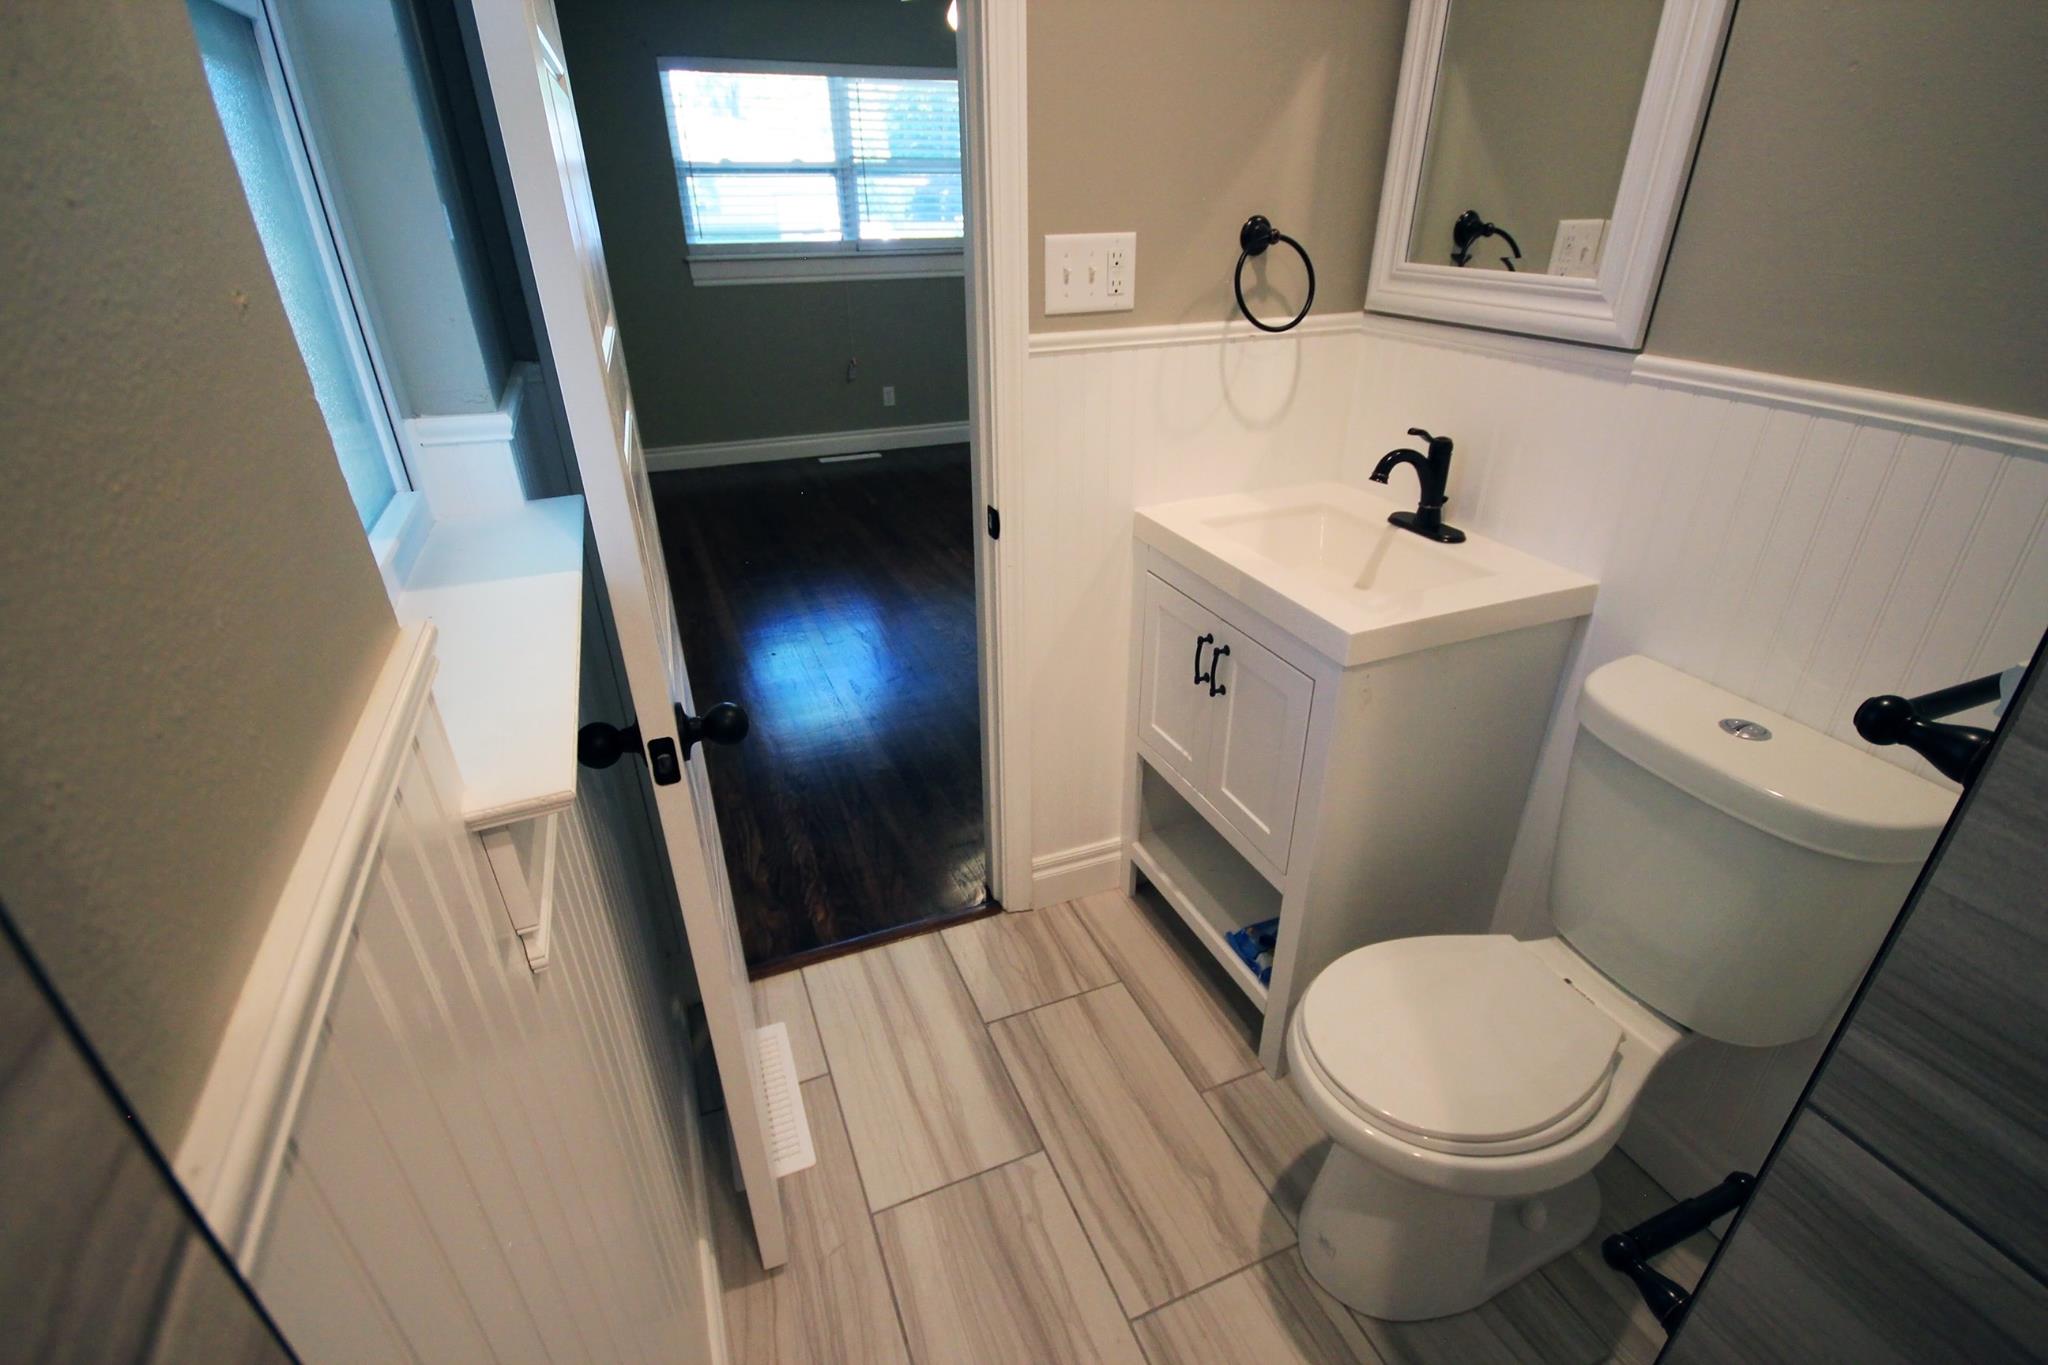 A bathroom with white tile floors and walls.